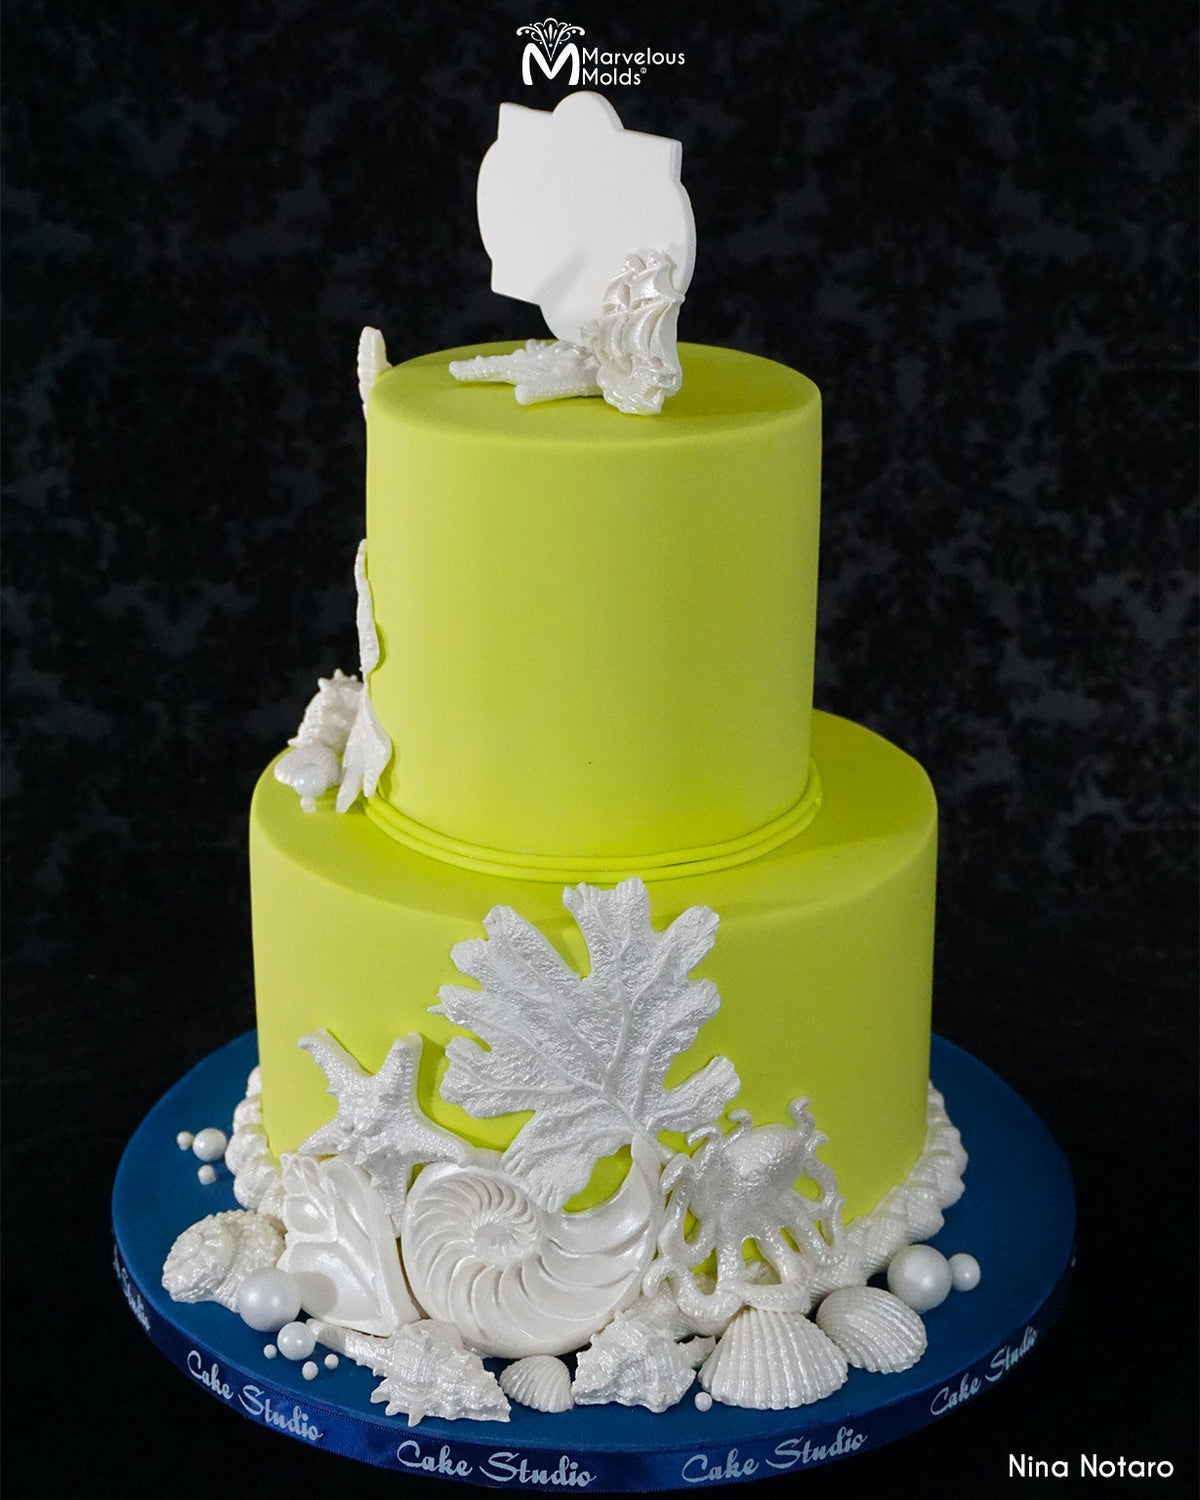 Lime Green Cake Decorated with Marvelous Molds Nautilus Shell Right Silicone Mold